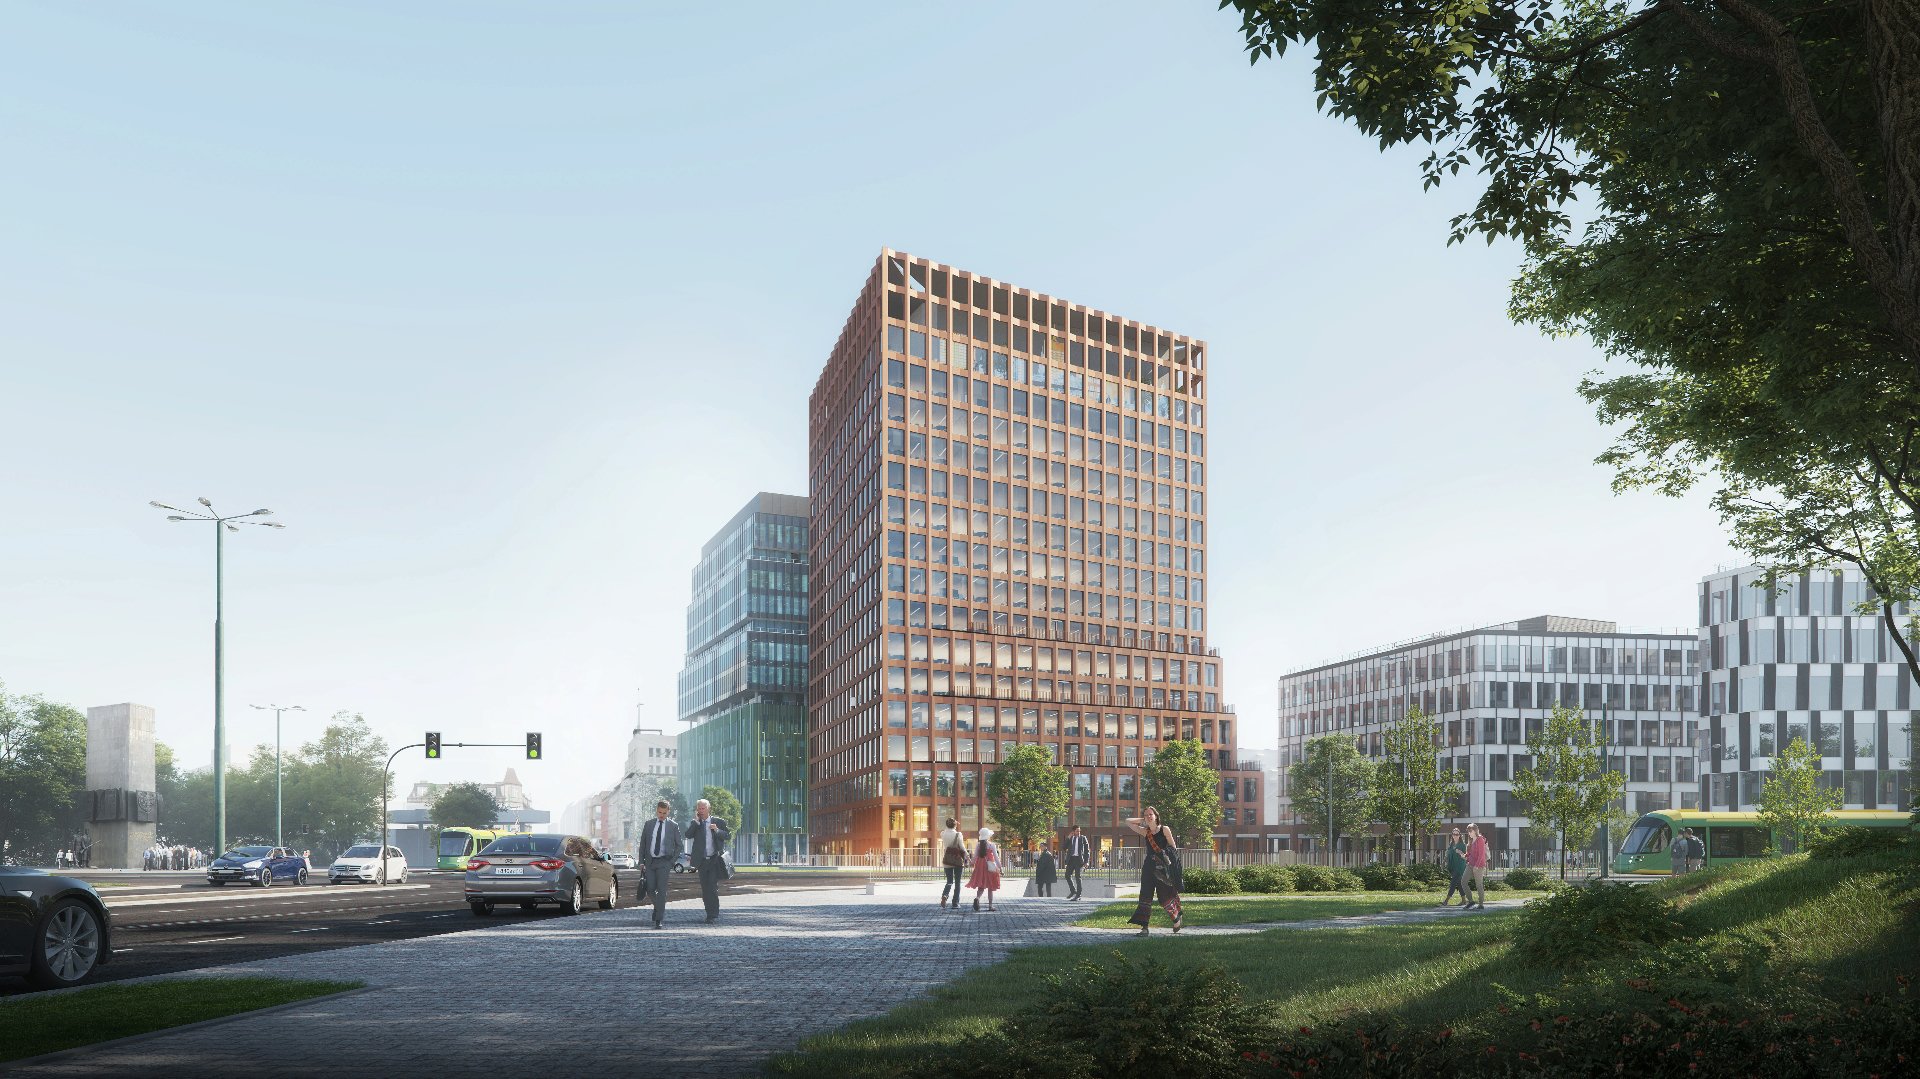 Nowy Rynek is a multi-phase project that will ultimately consist of 5 buildings with different functionalities - grafika artykułu